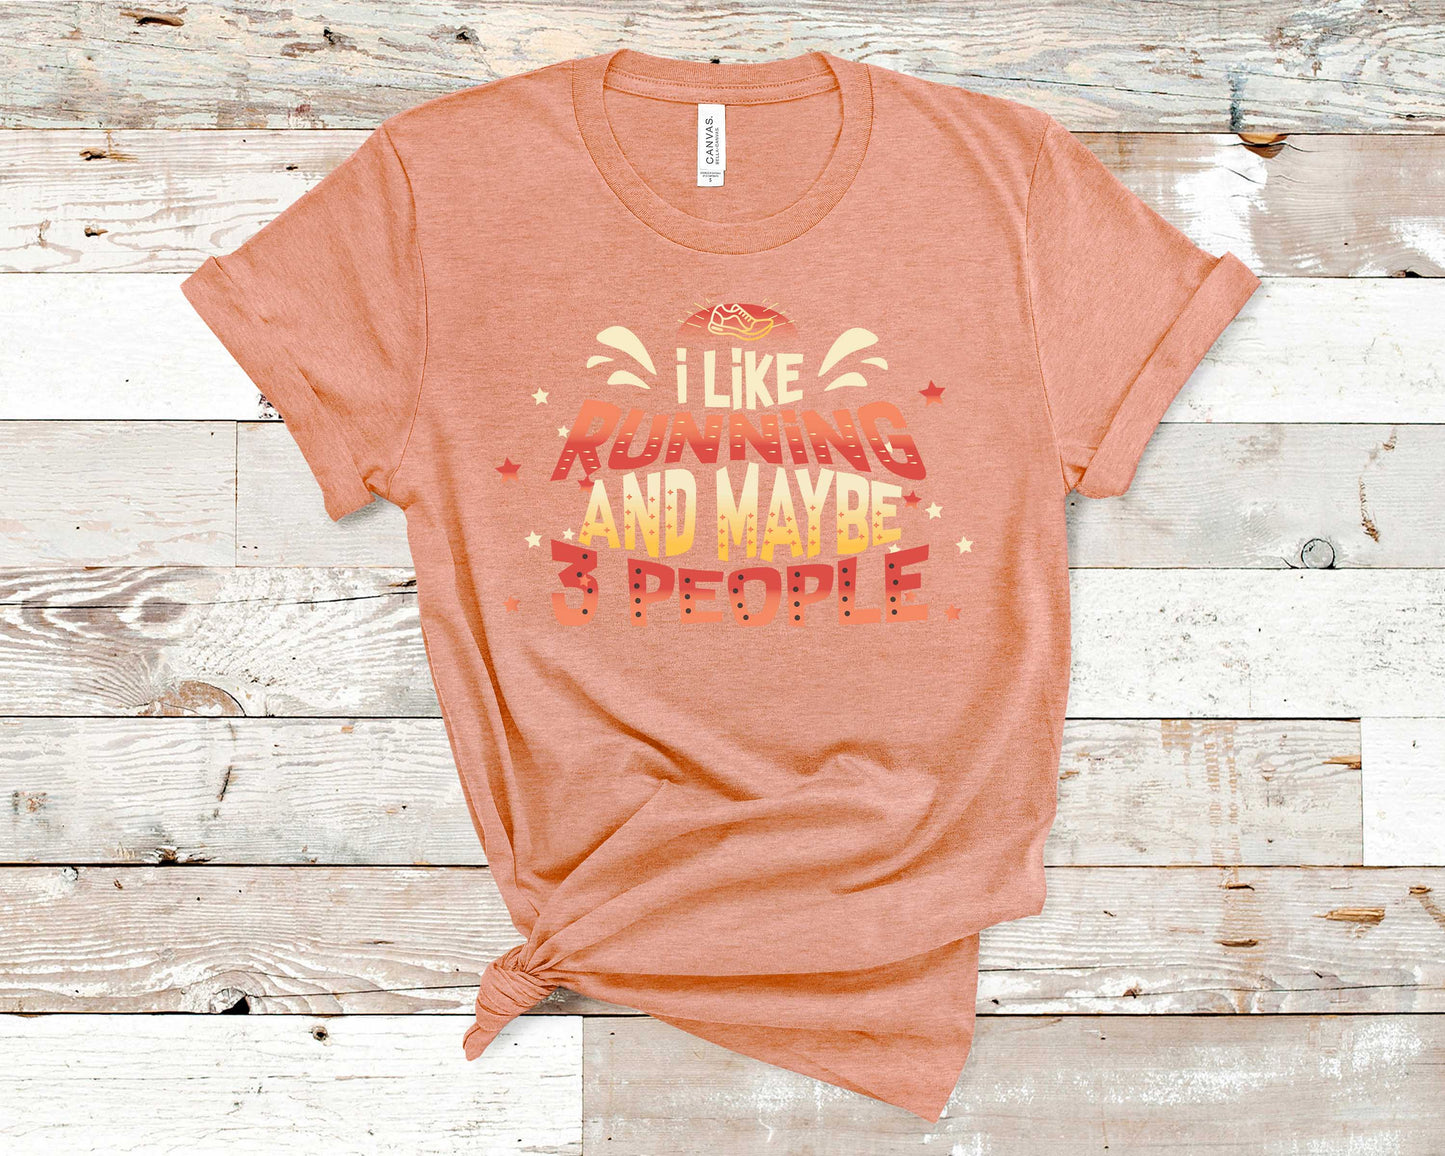 I Like Running and Maybe 3 People - Fitness Shirt